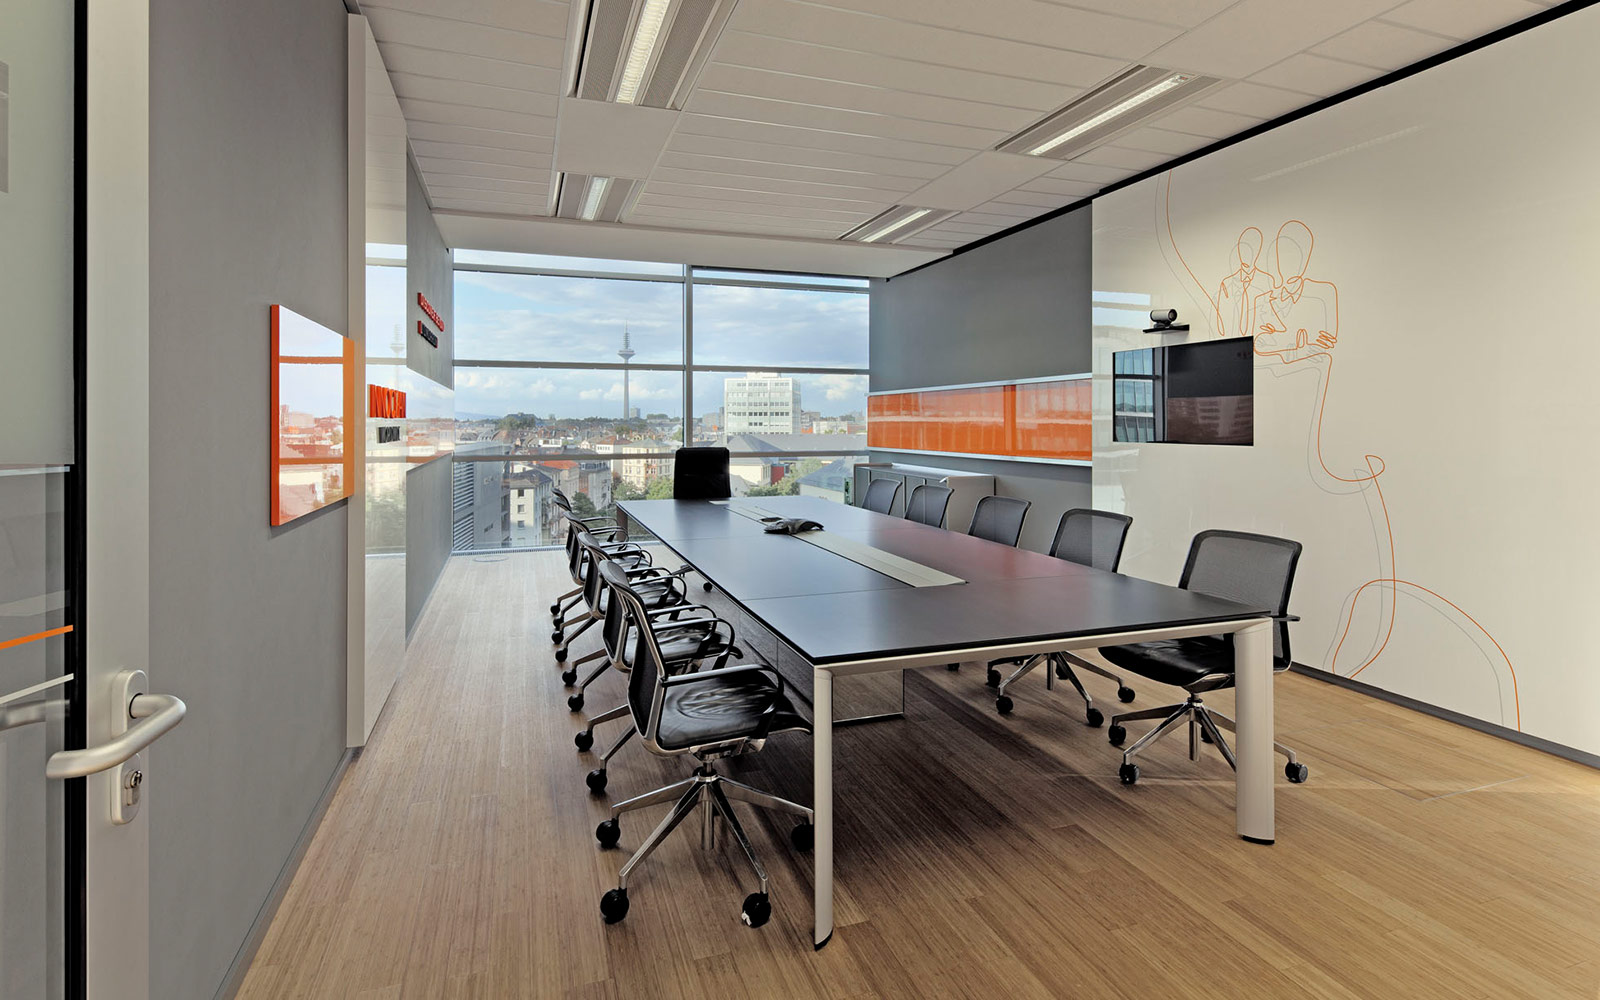 Interior and office finishing by Display International for IWE – high quality as GU